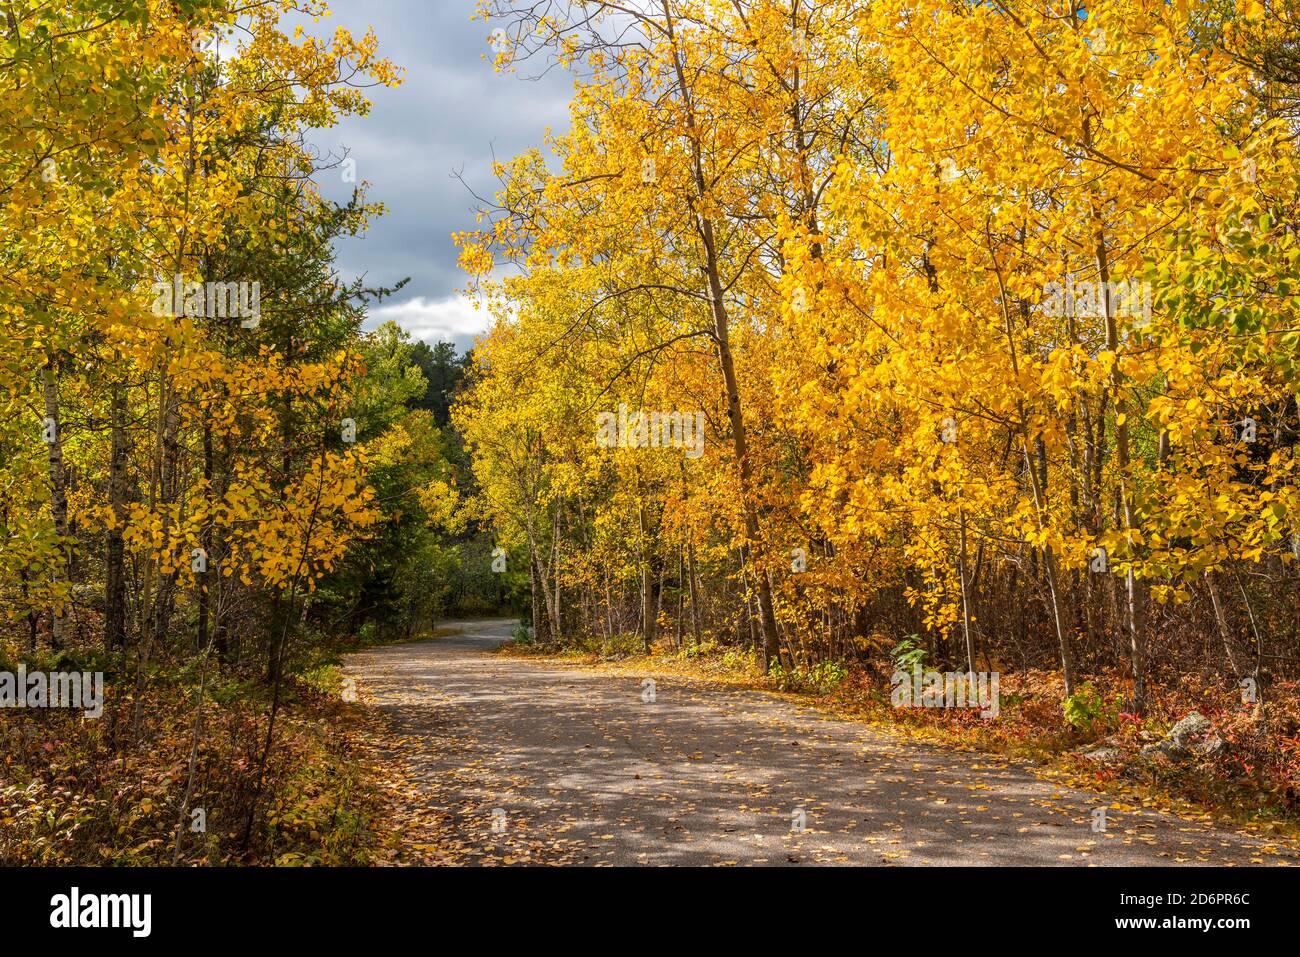 Fall foliage color in the trees at Rushing River Provincial Park, Ontario, Canada. Stock Photo